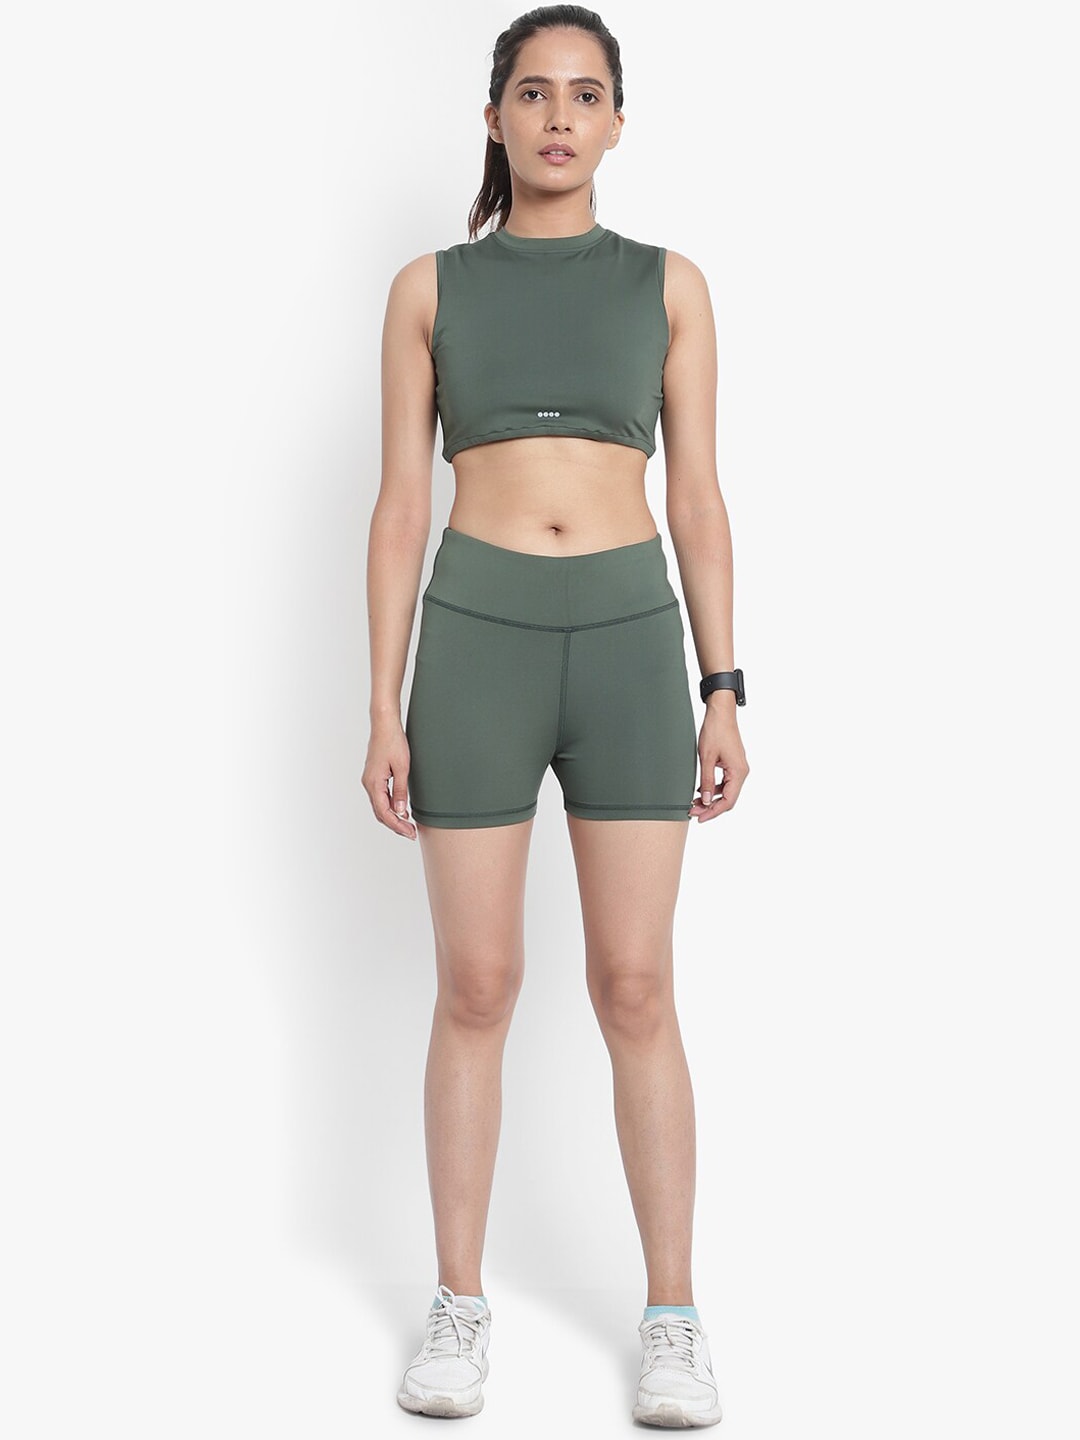 Wearjukebox Women Olive Green Sports Crop Top with Shorts Price in India